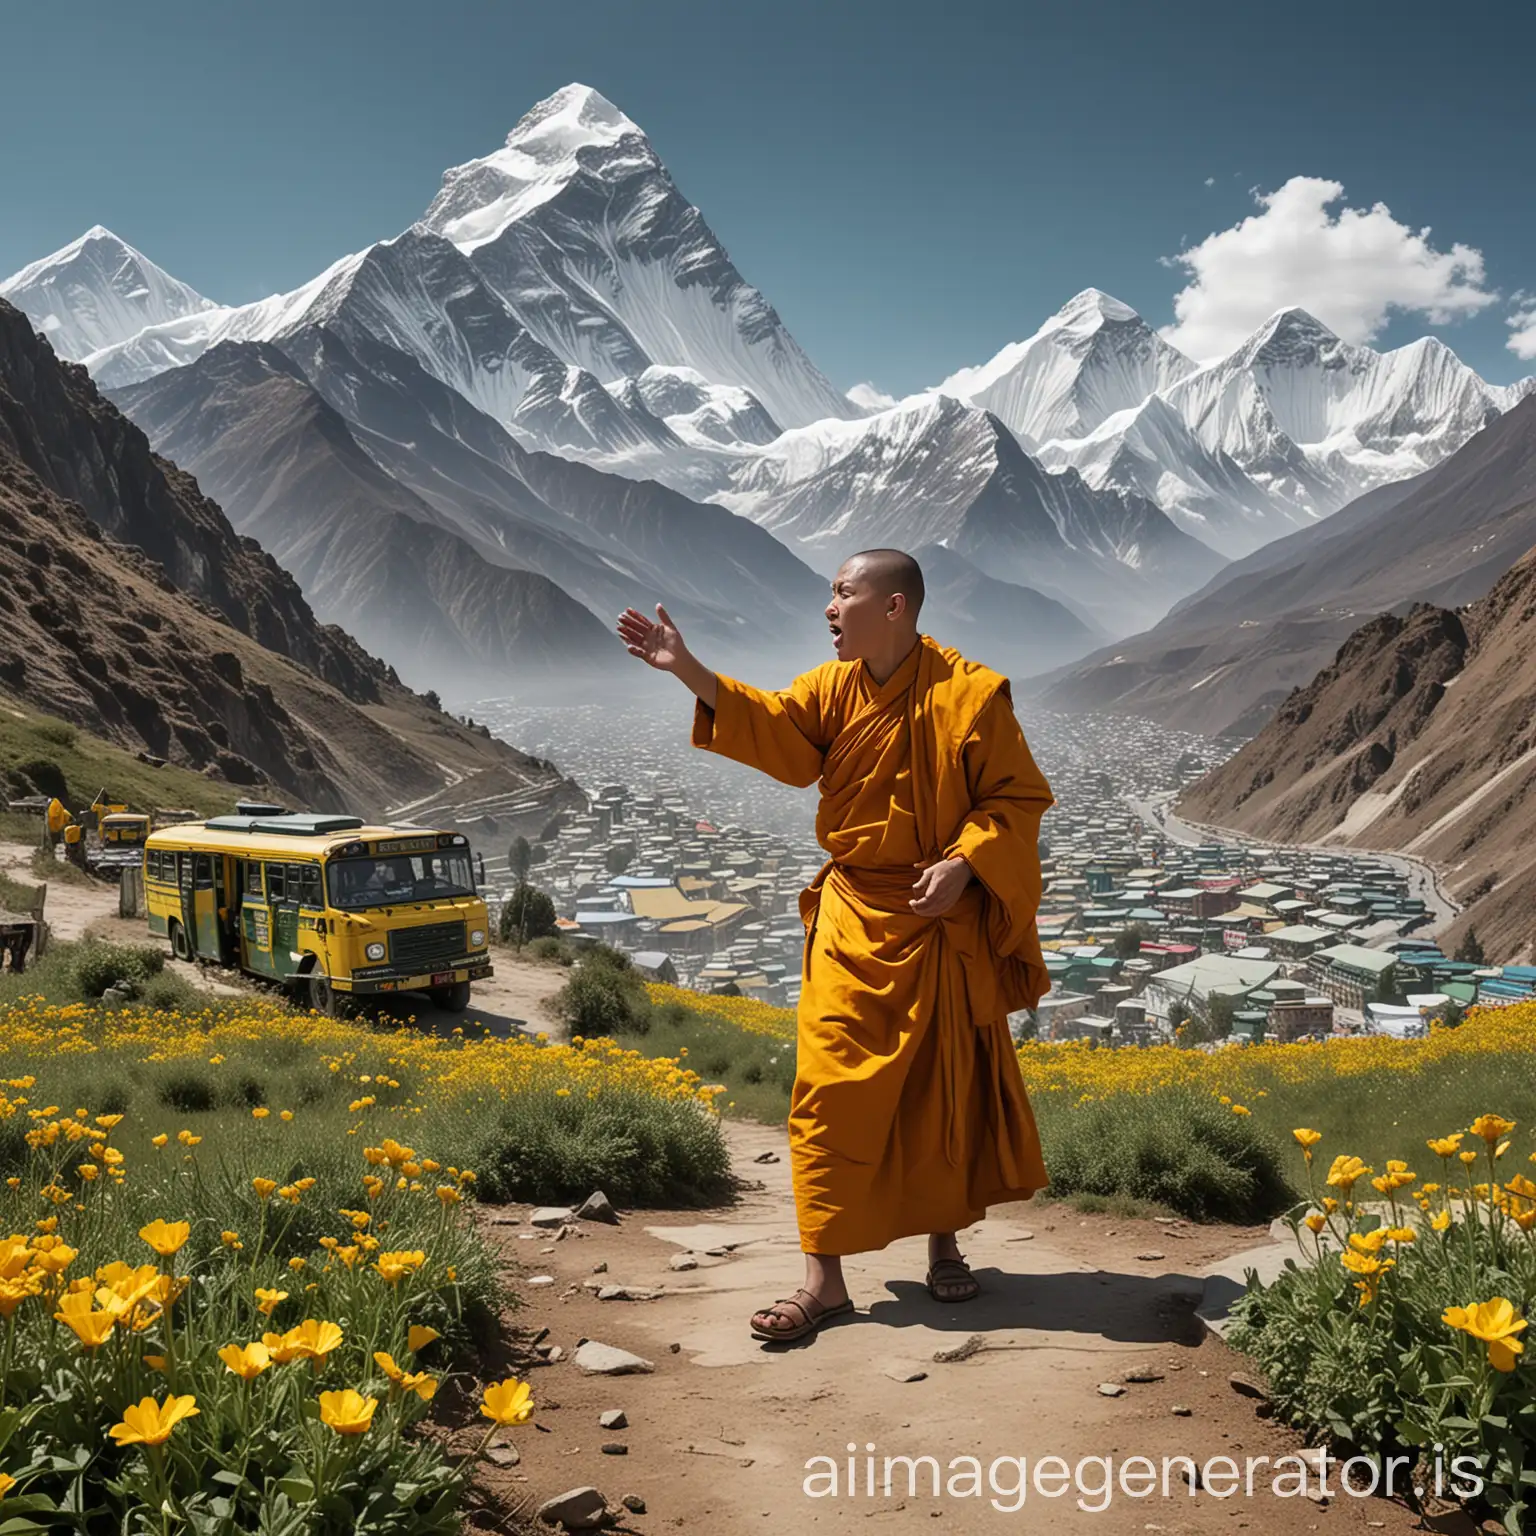 Create a picture of a monk boy arguing god of wisdom for he not able to understand the mantra of being knowledgeable. The background is on the top hill of the mountain mark  by  green buses with yellow and blue flowers glancing the majestic mount everest. The monk fried from behind stopping.